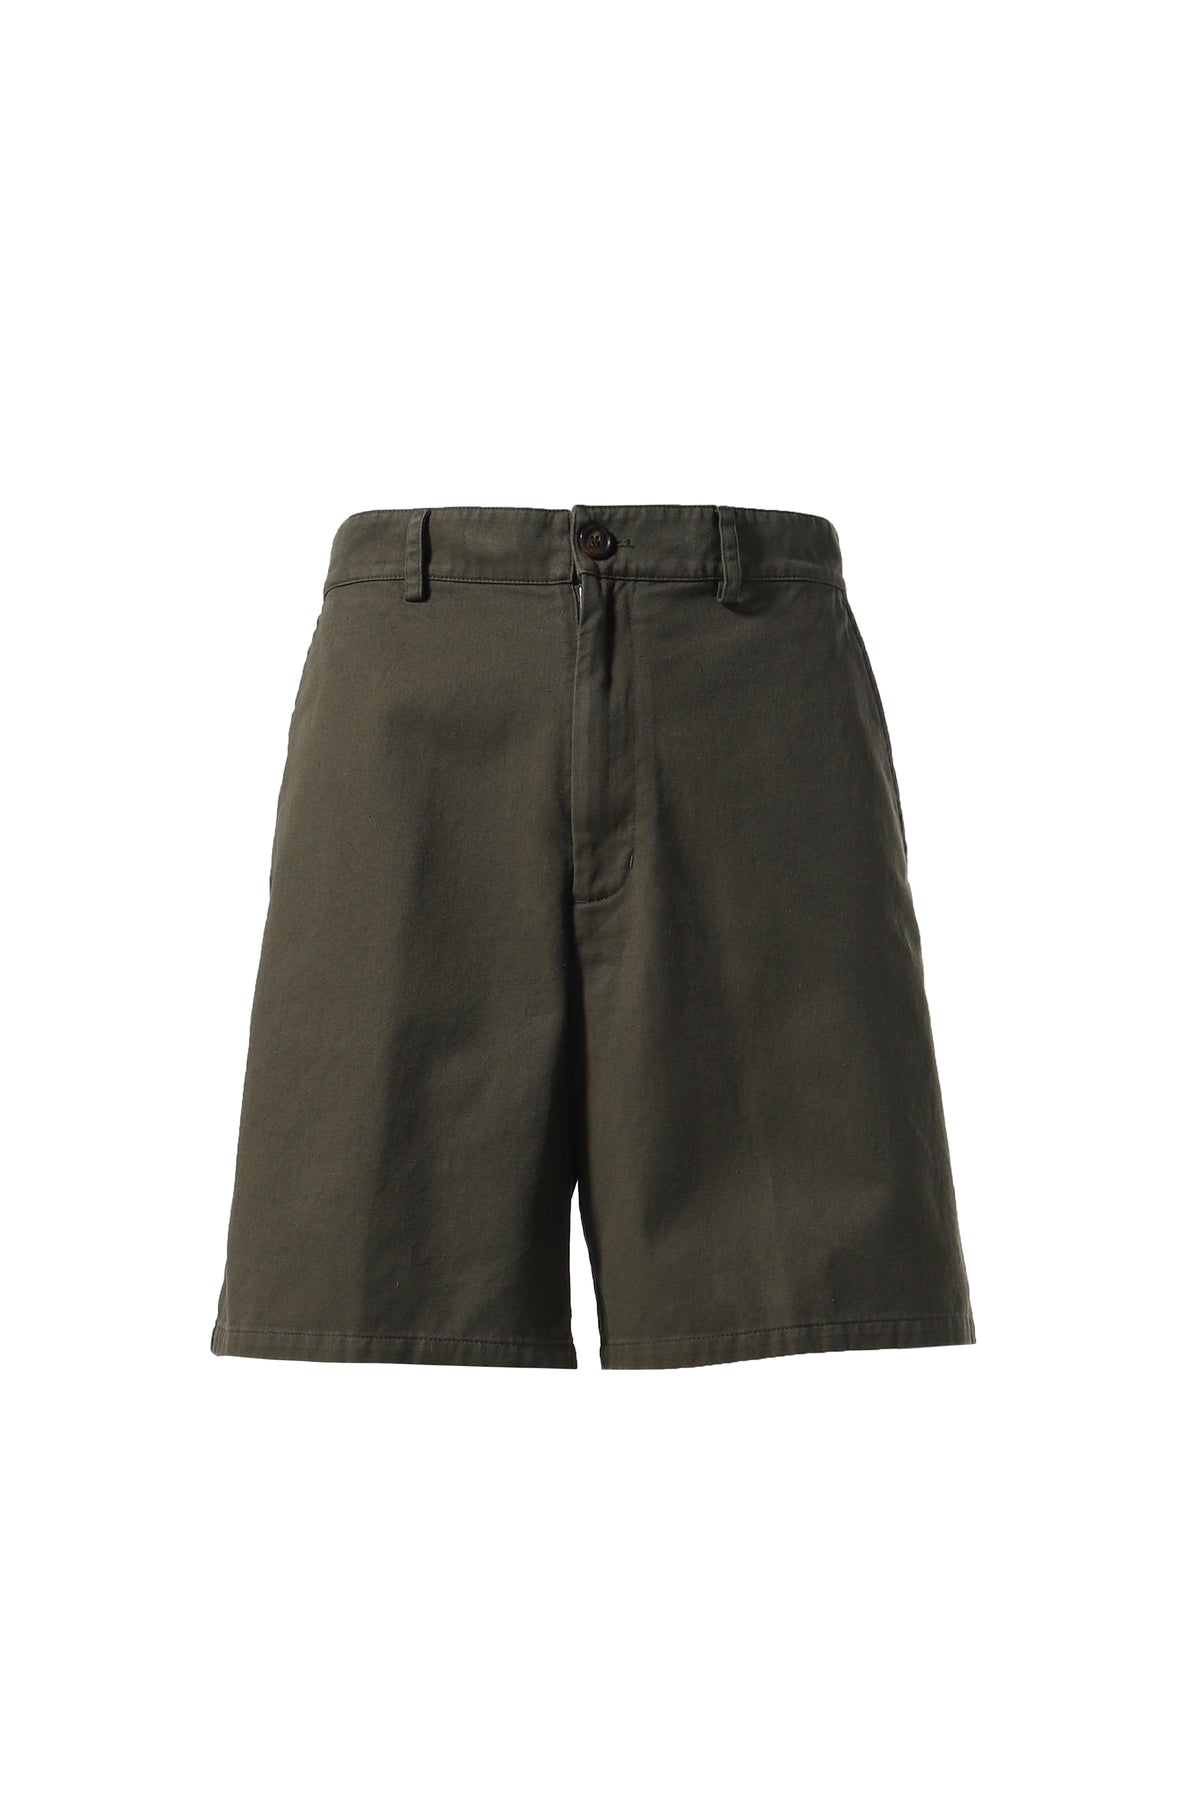 TROUSERS / MILITARY GRN